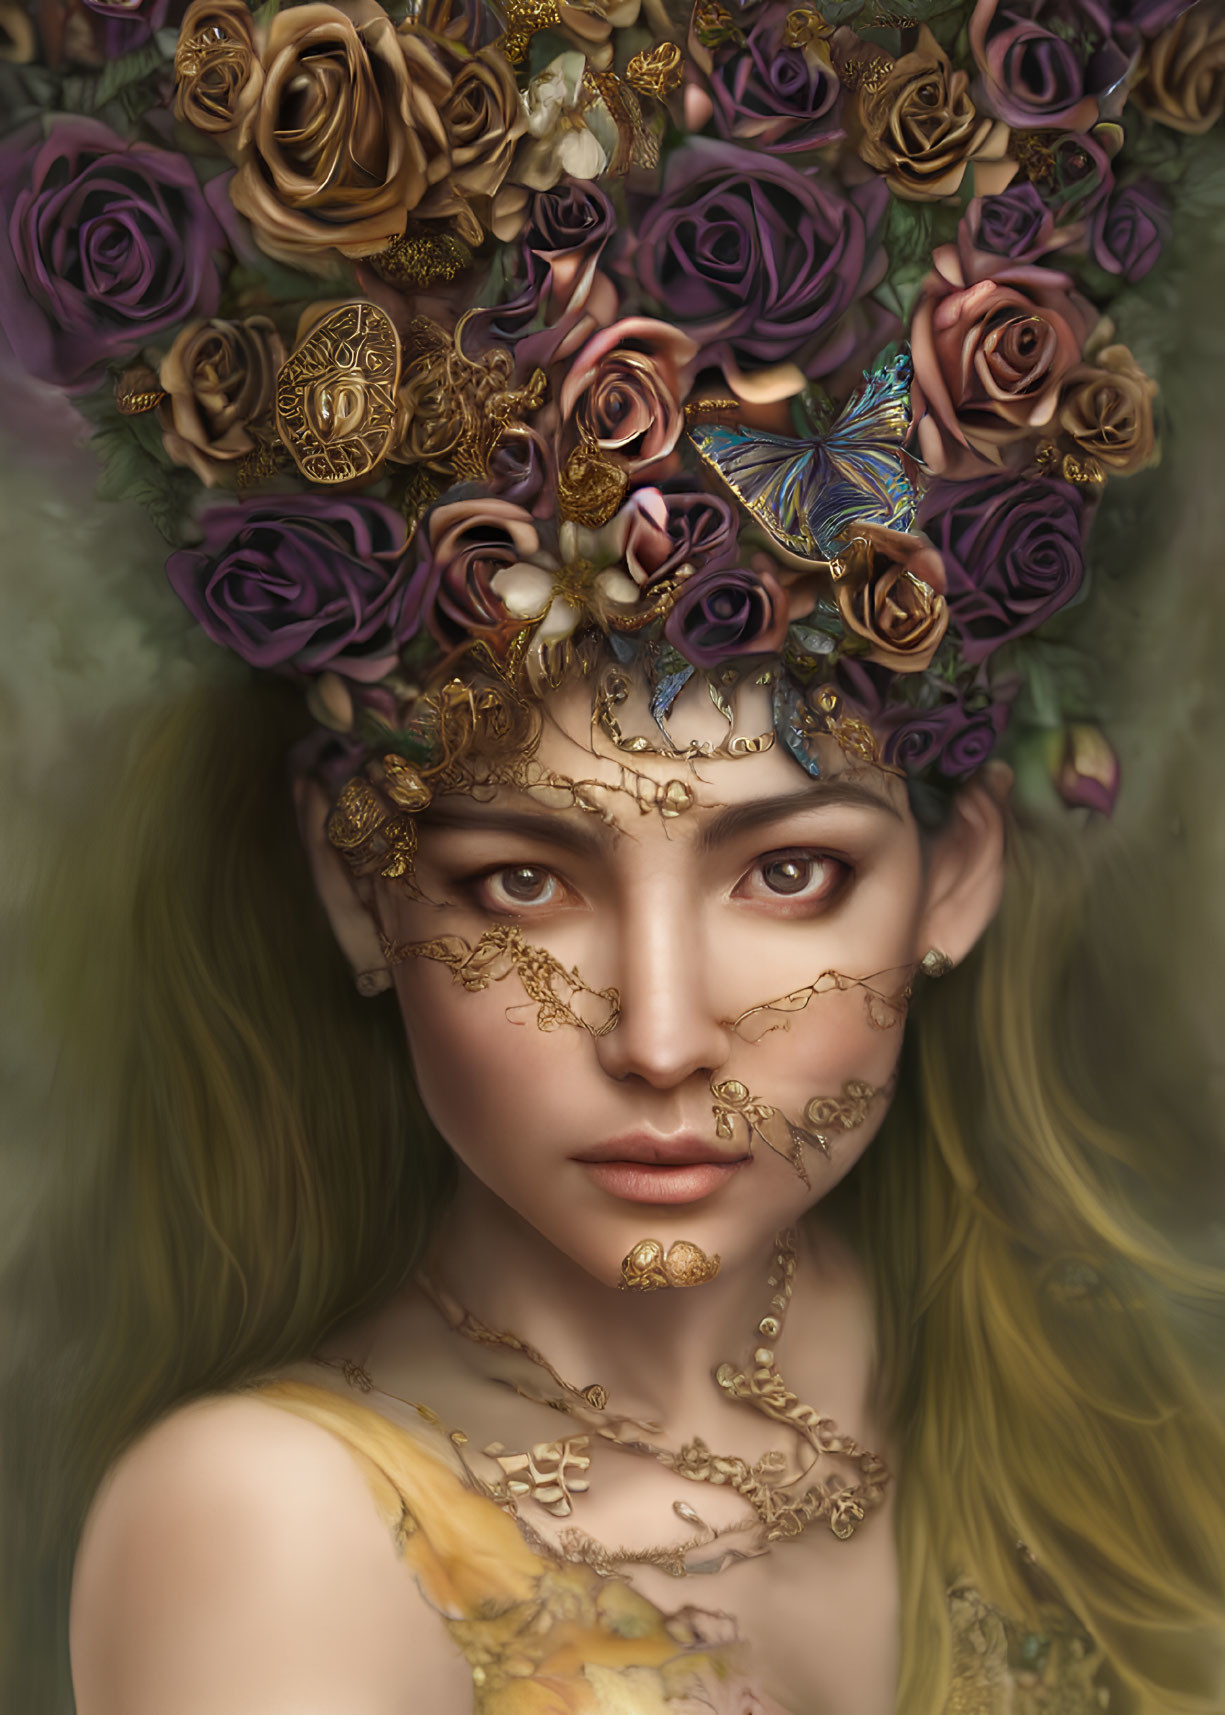 Digital Artwork: Woman with Rose Crown, Gold Jewelry, Butterfly, Mystical Theme